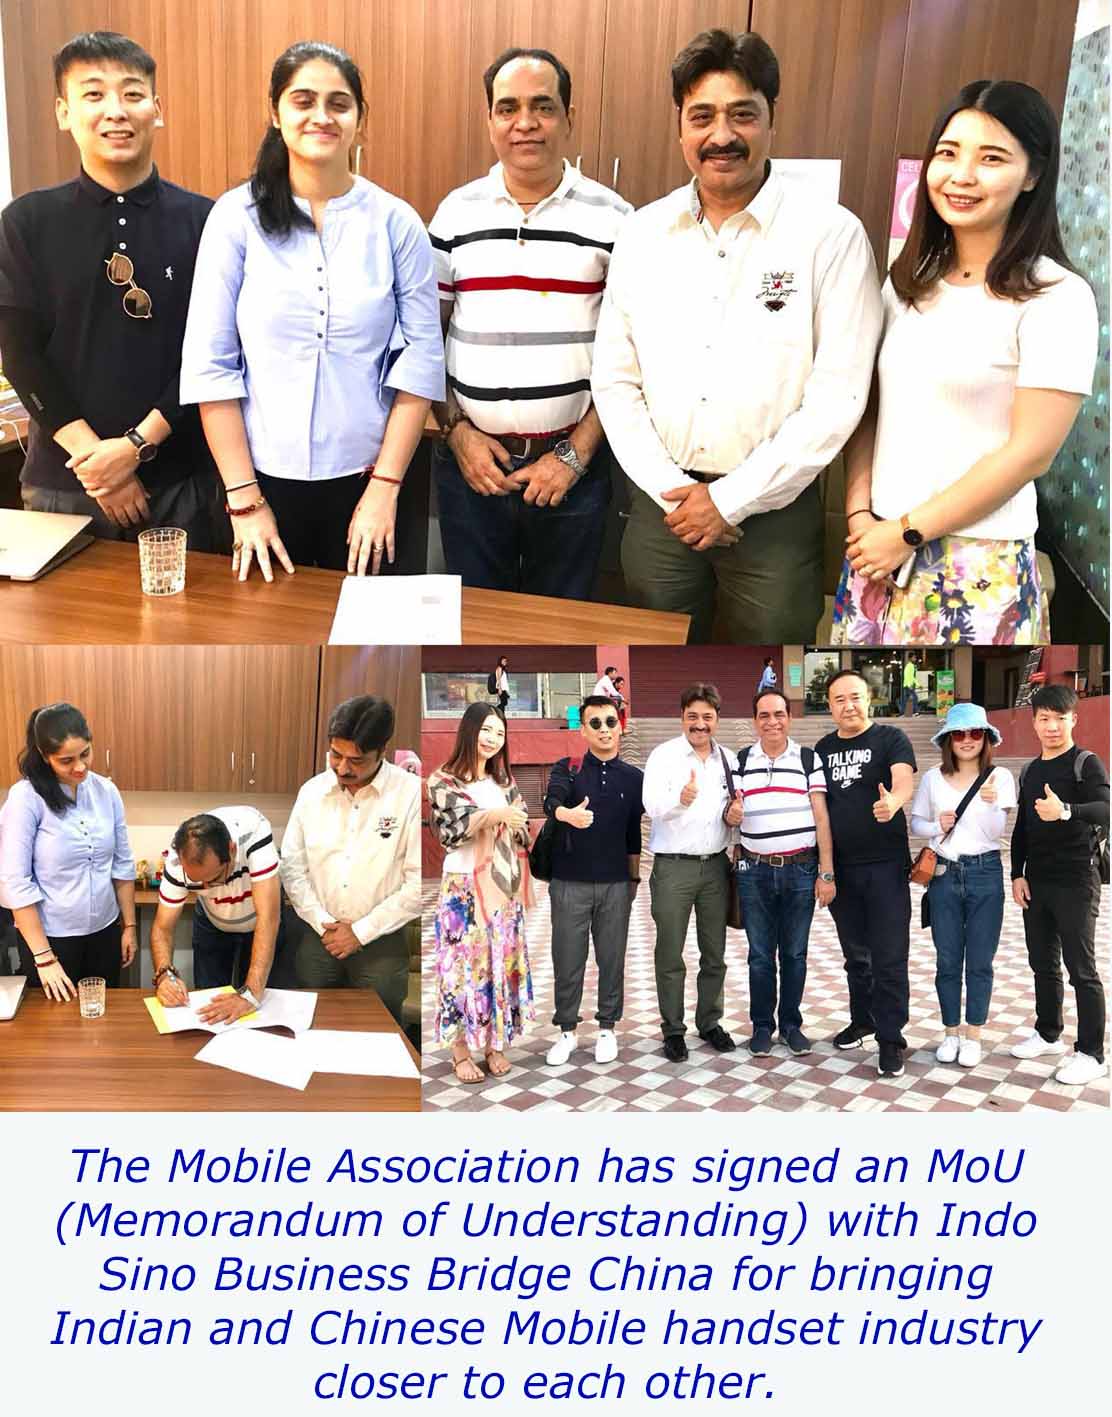 The Mobile Association signs MoU with Indo Sino Business Bridge China